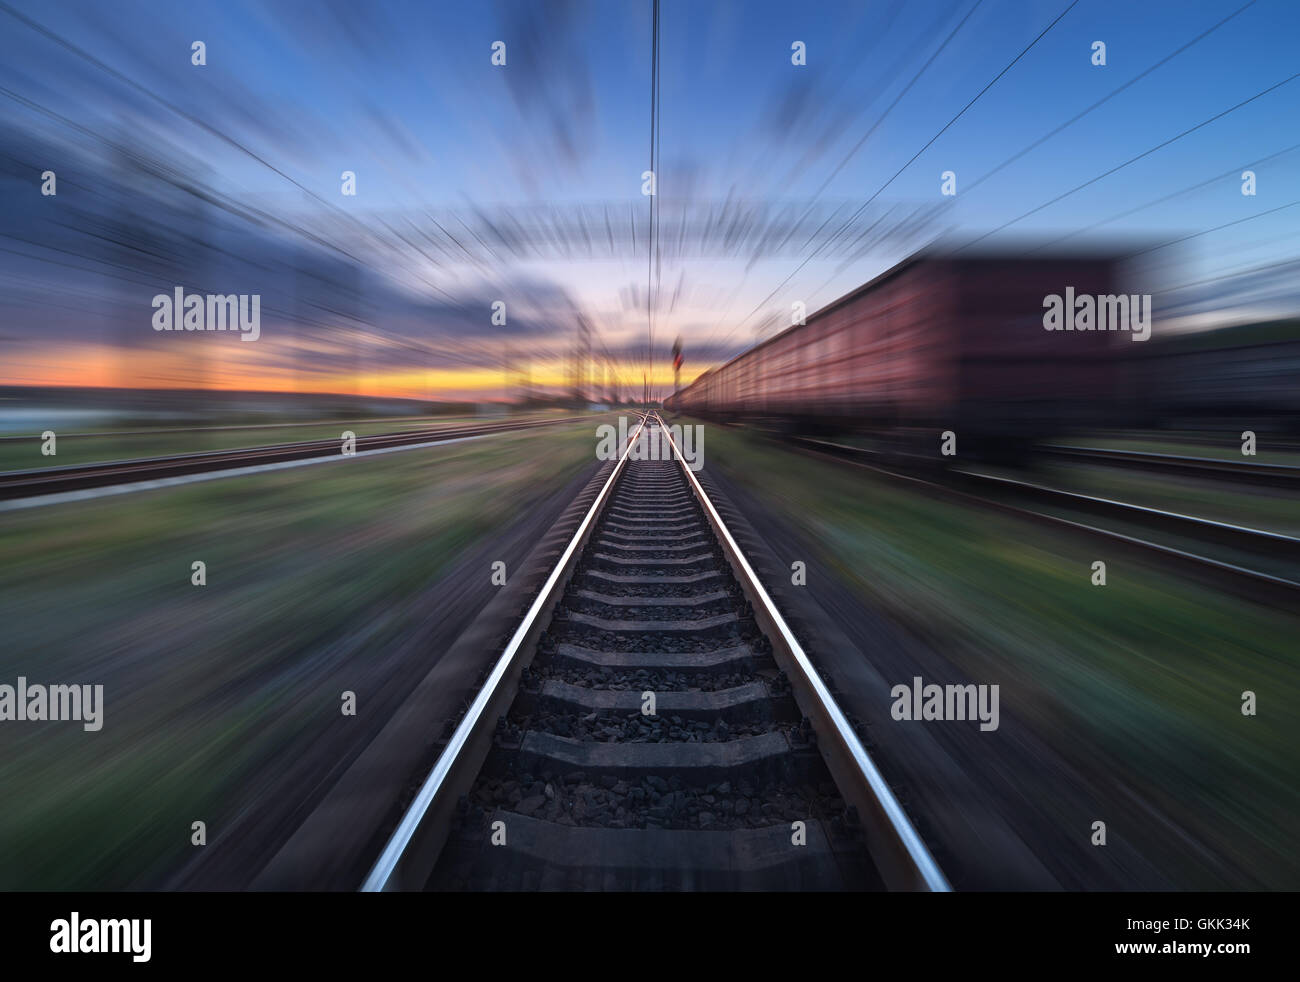 Railway station with cargo wagons in motion at sunset. Railroad with motion blur effect. Railway platform at dusk. Heavy industr Stock Photo